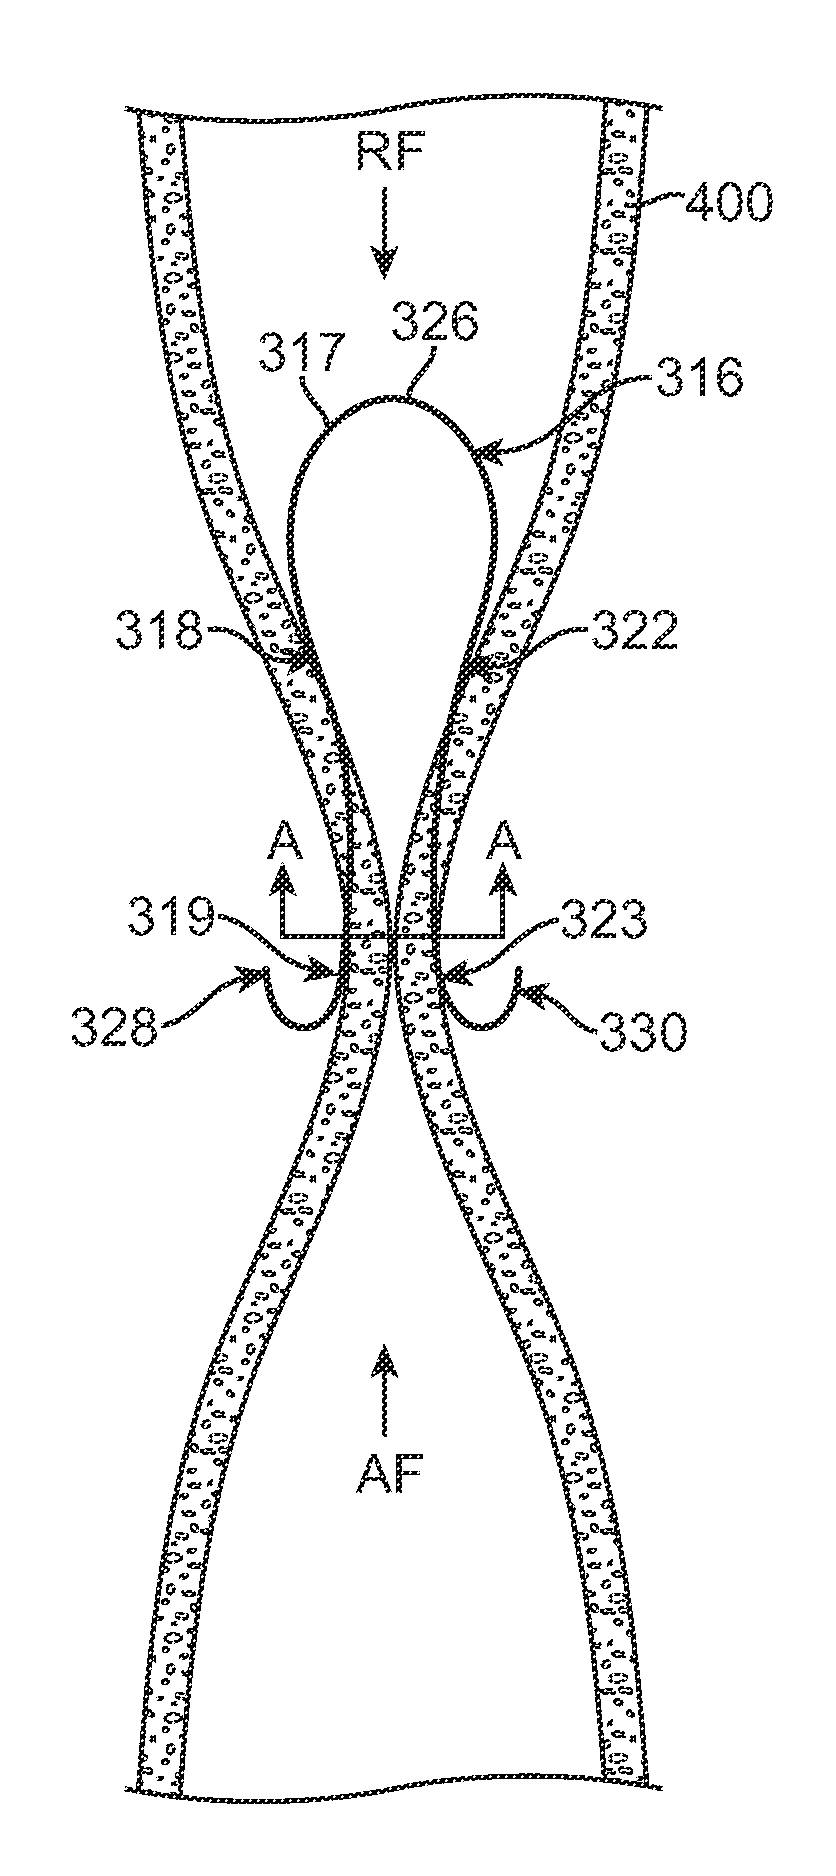 Apparatus and Methods for Creating a Venous Valve From Autologous Tissue